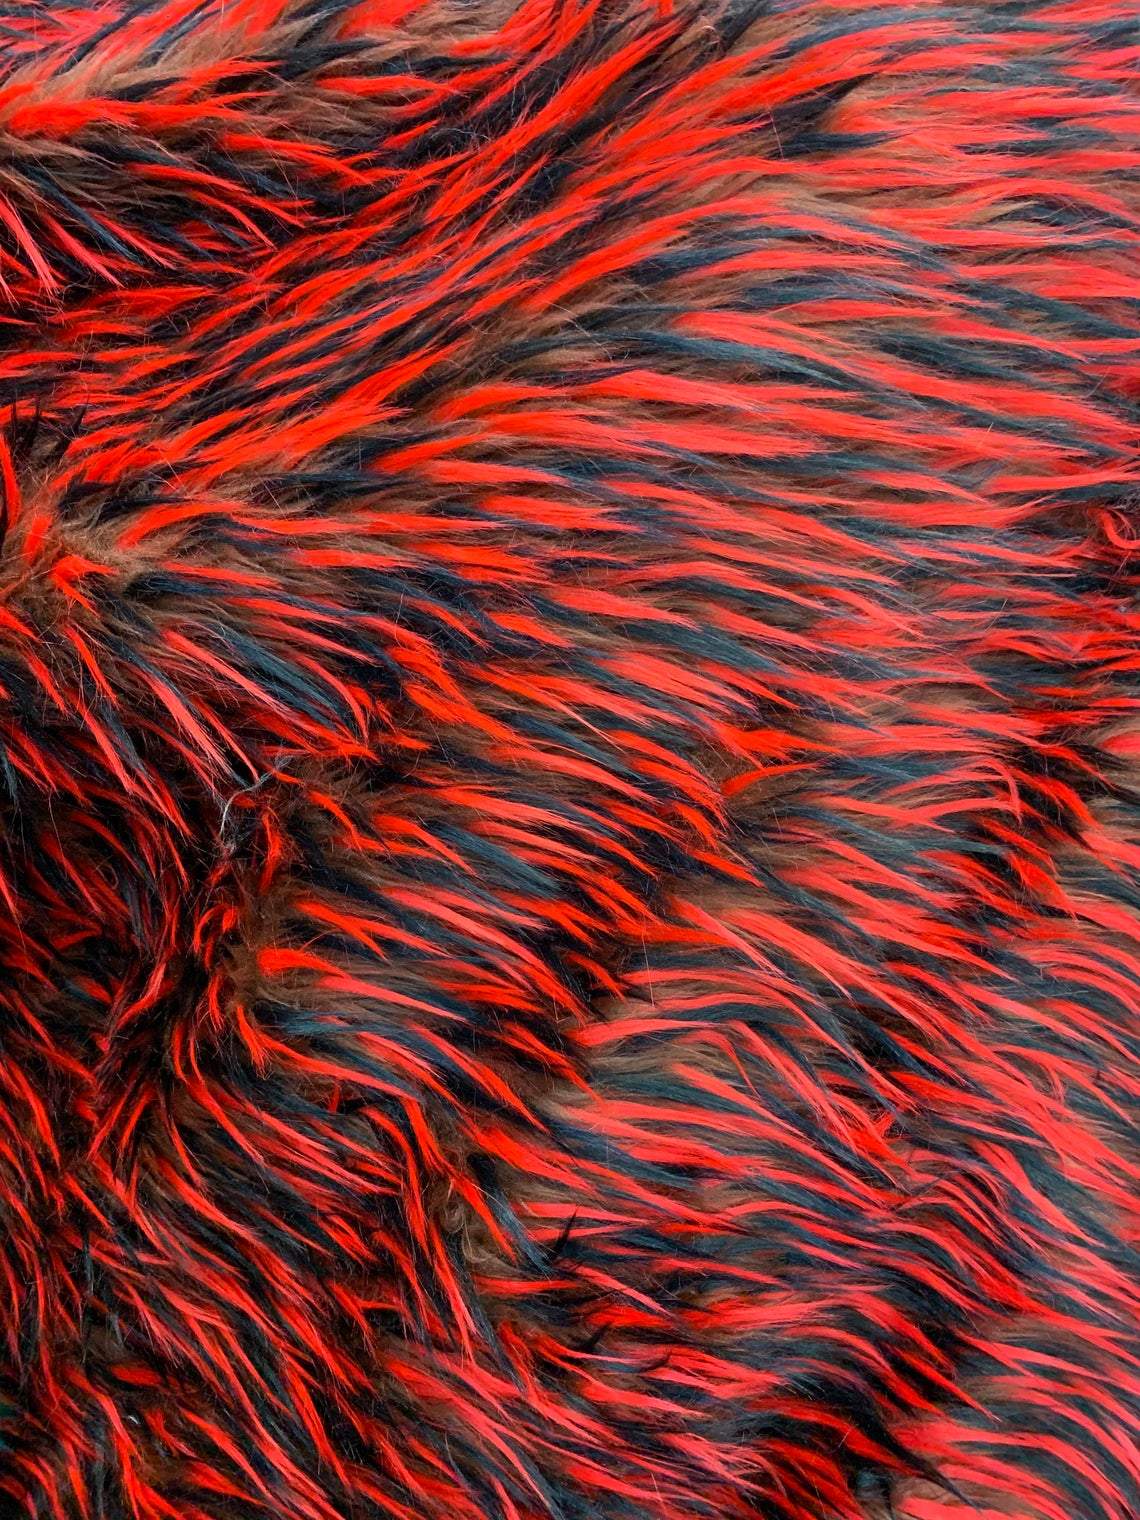 3 Tone Long Pile Design 60 Inches Wide Faux Fur Fake FabricICE FABRICSICE FABRICSRed Brown BlackBy The Yard (60 inches Wide)3 Tone Long Pile Design 60 Inches Wide Faux Fur Fake Fabric ICE FABRICS |Red Brown Black